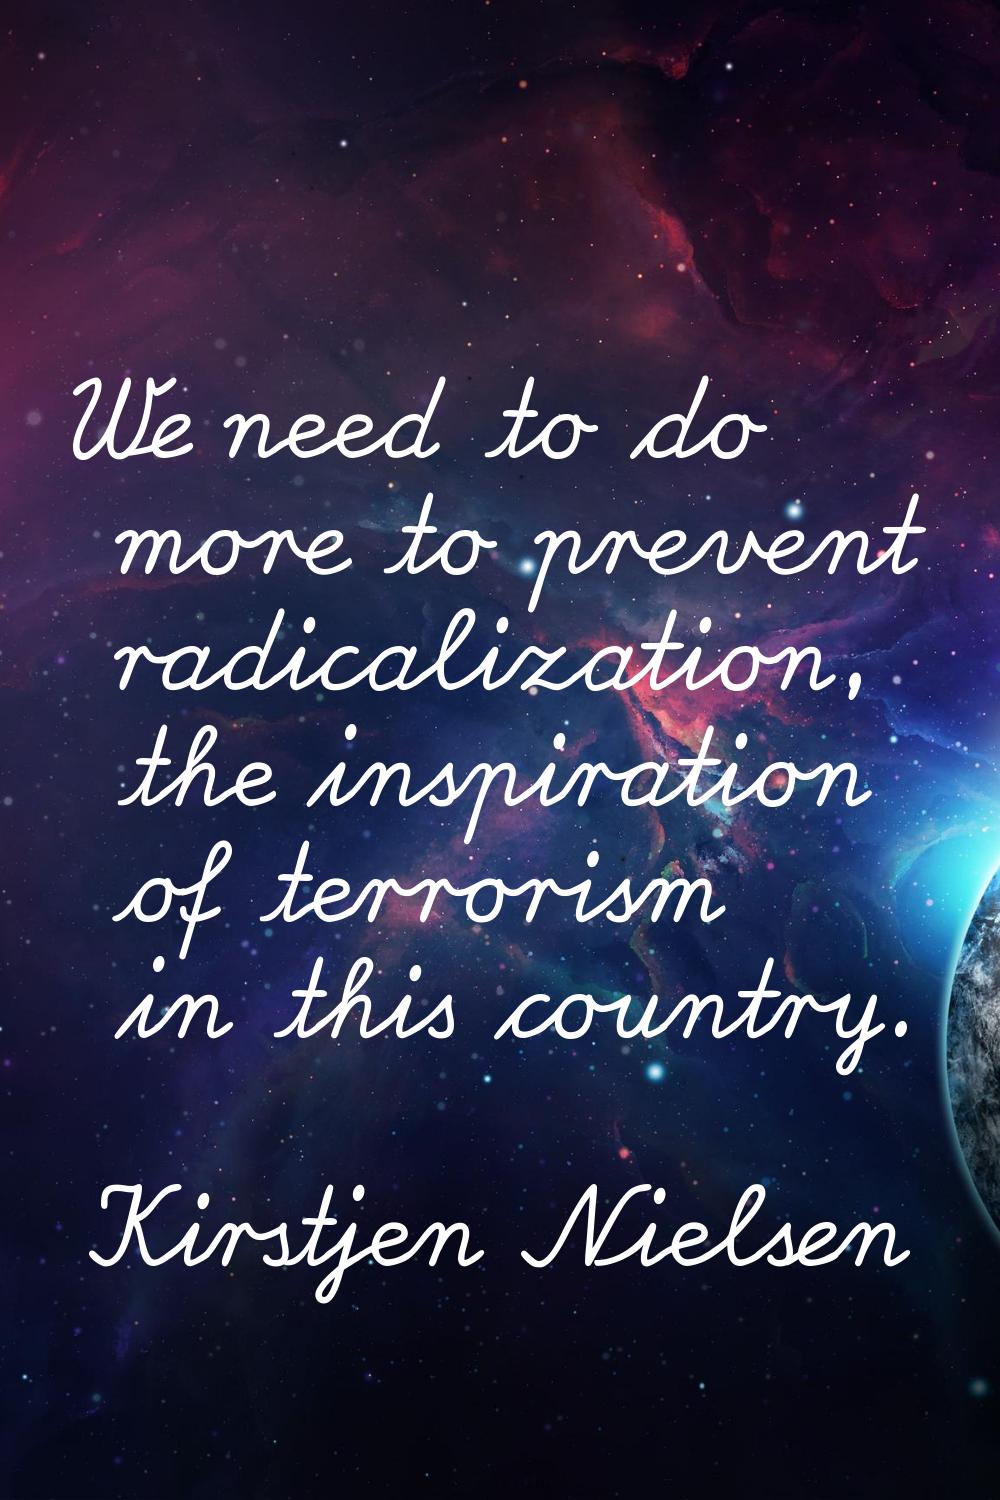 We need to do more to prevent radicalization, the inspiration of terrorism in this country.